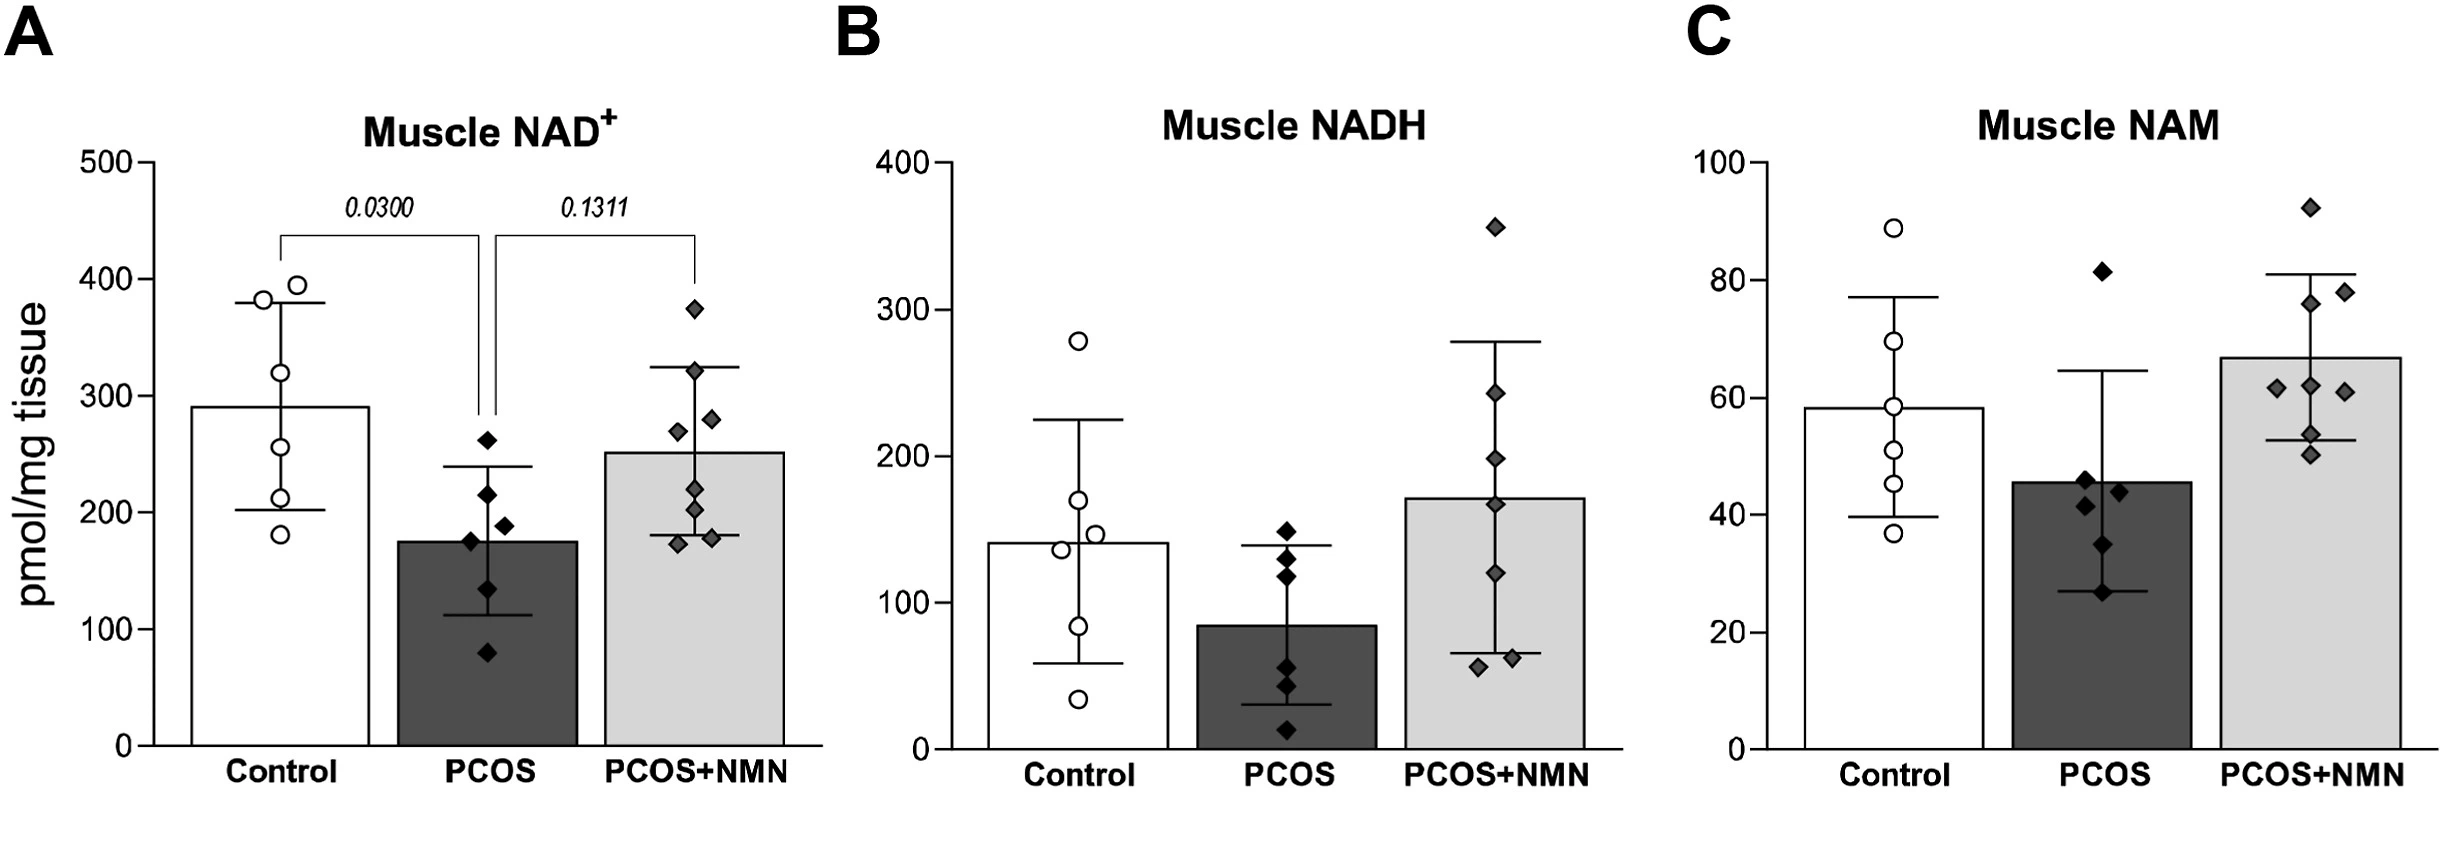 NMN restores muscle NAD+ levels in PCOS mice